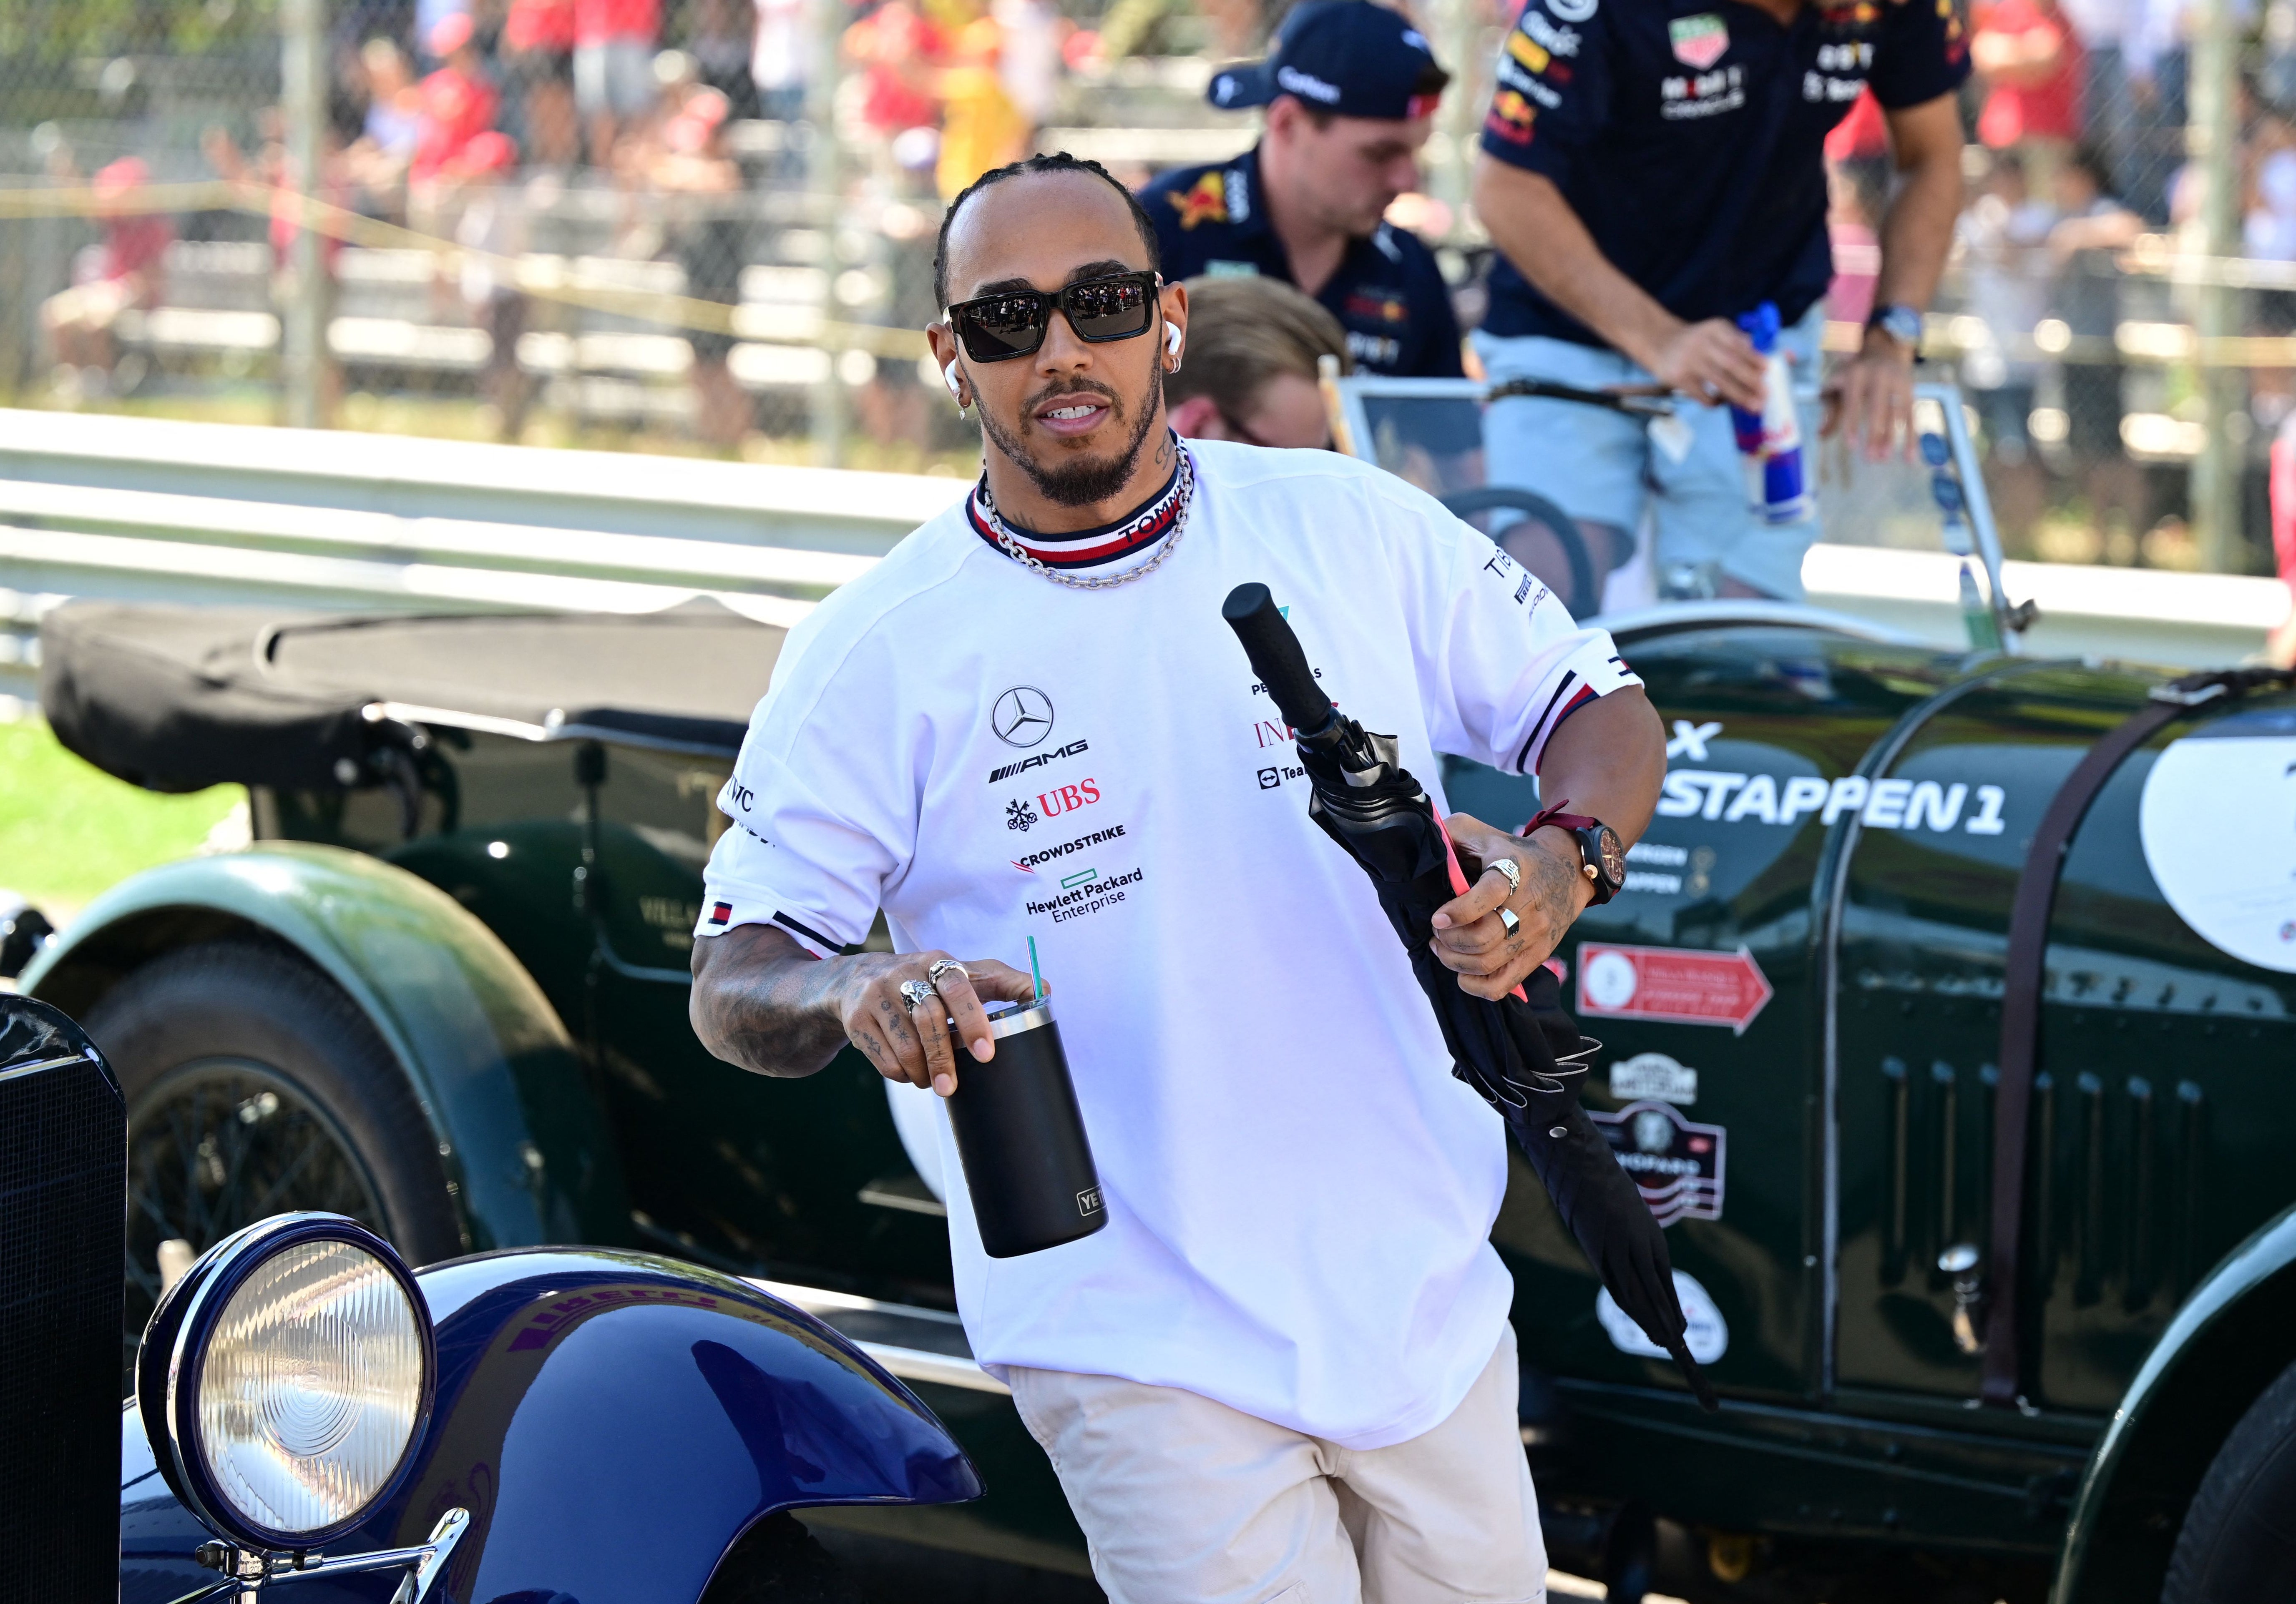 Lewis Hamilton says the safety car rules were correctly applied at the end of the Italian Grand Prix